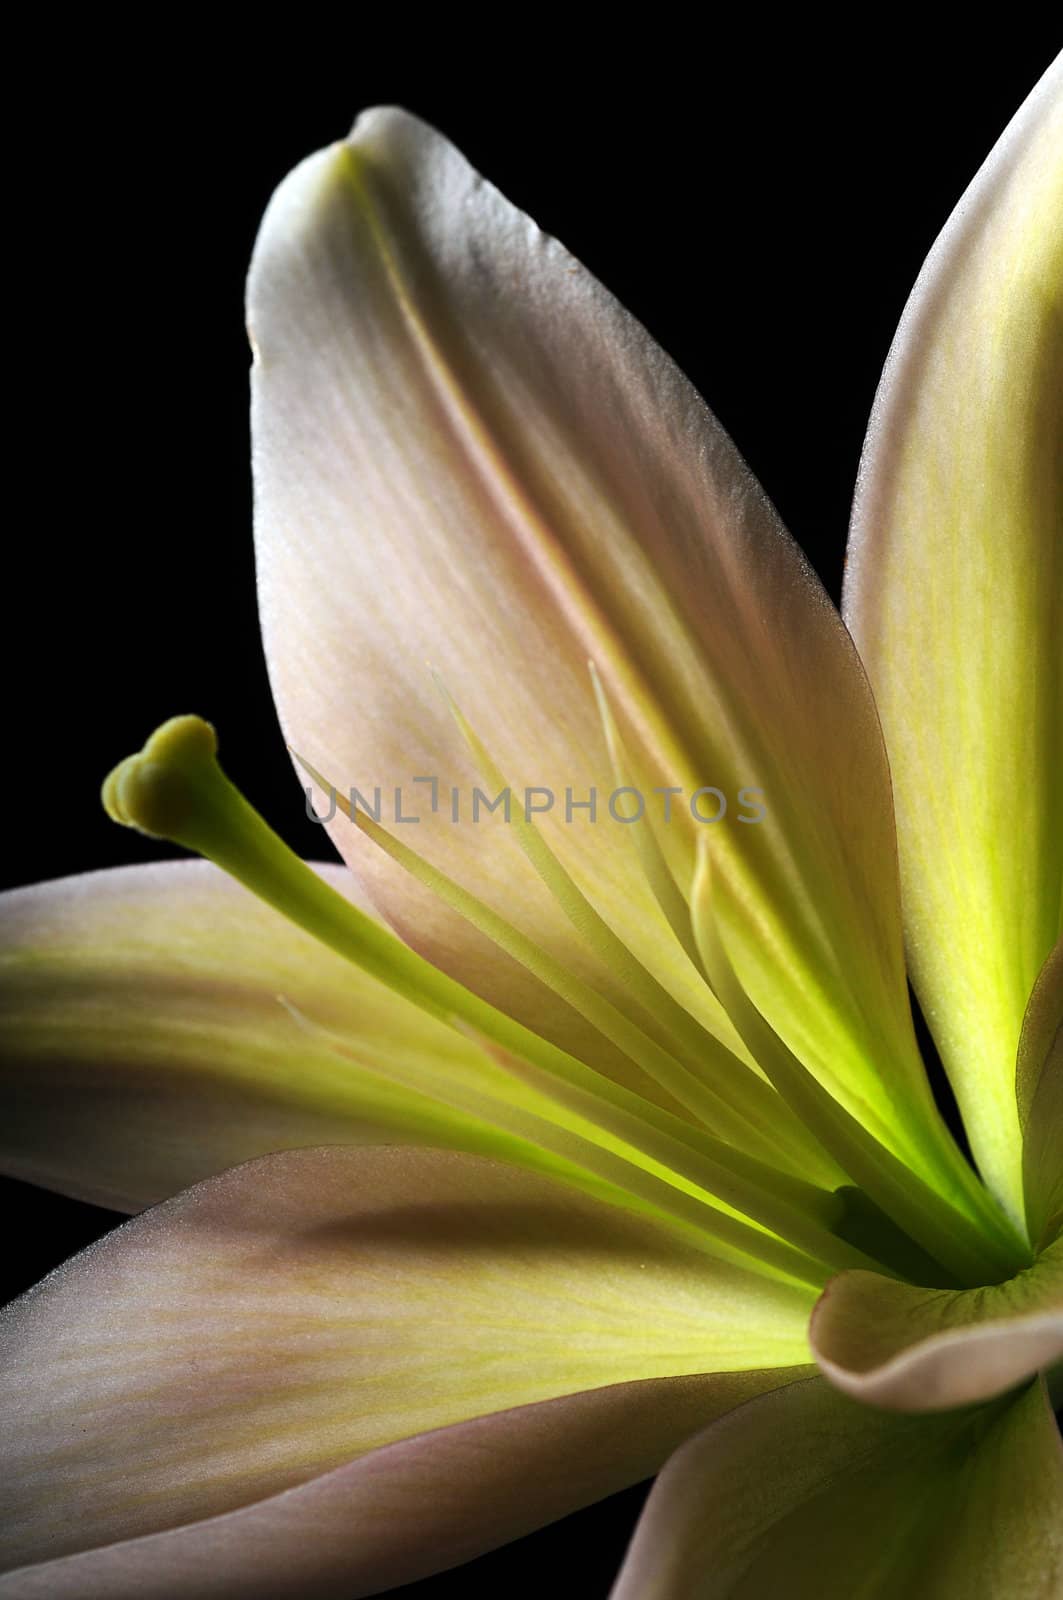 Lily flower and stamen by ftlaudgirl